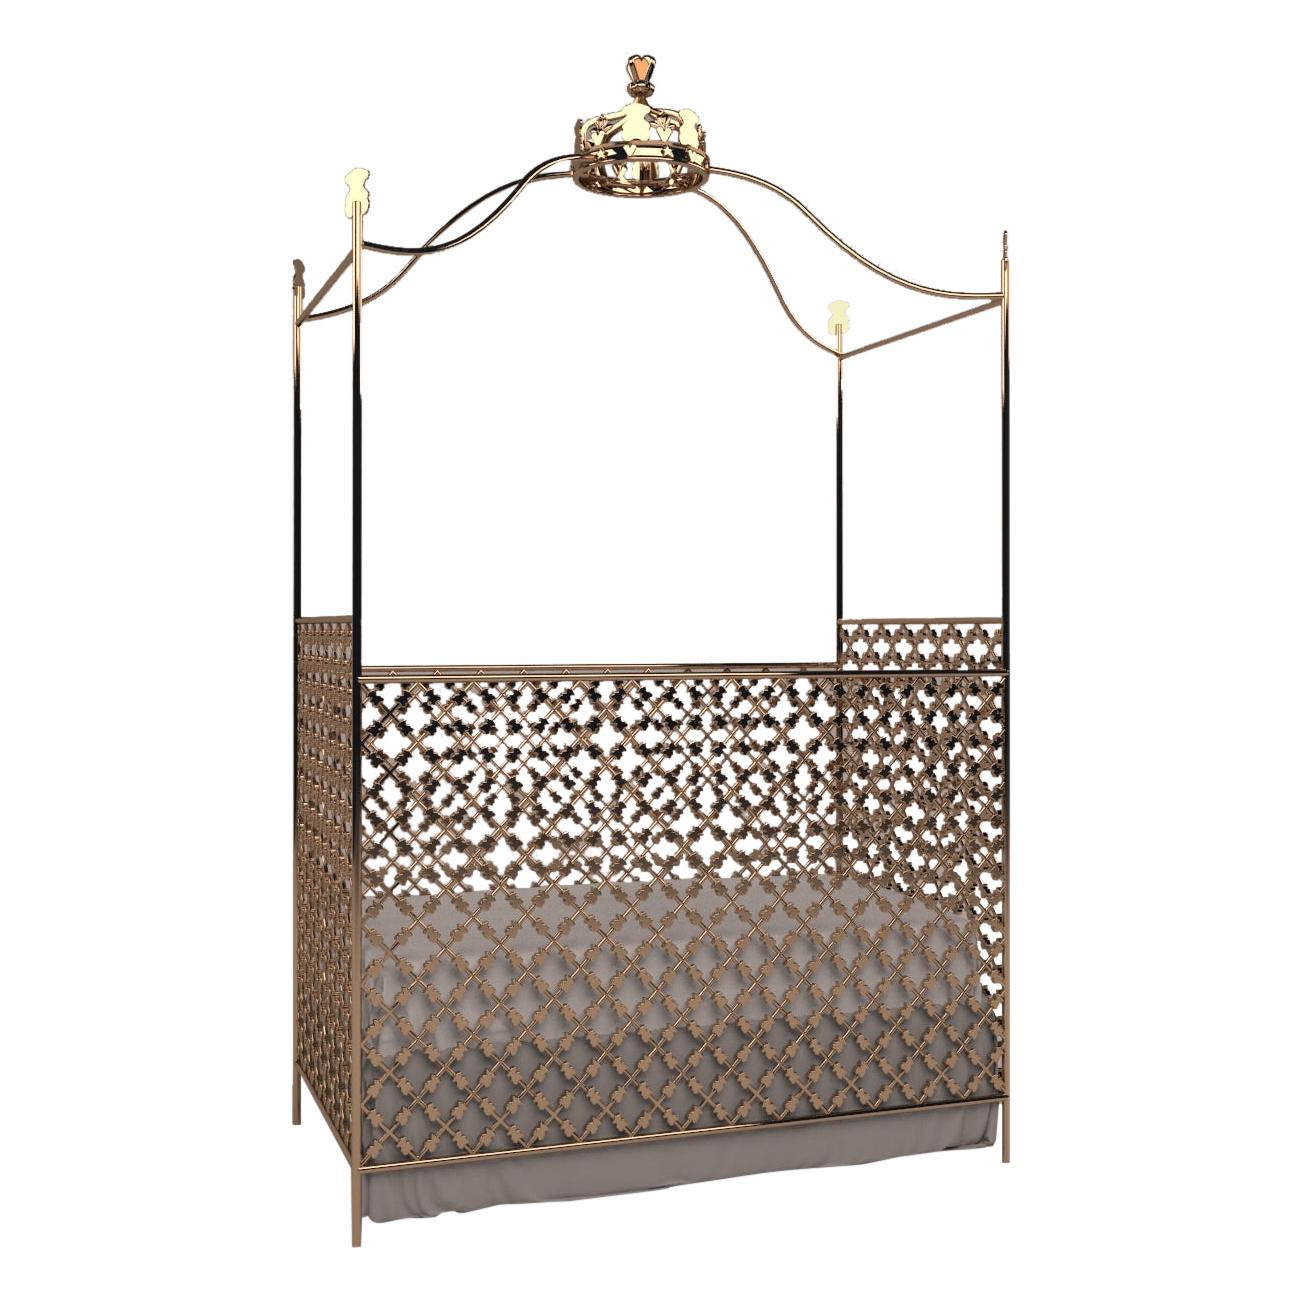 Gold Plated Magical Cot, Magical